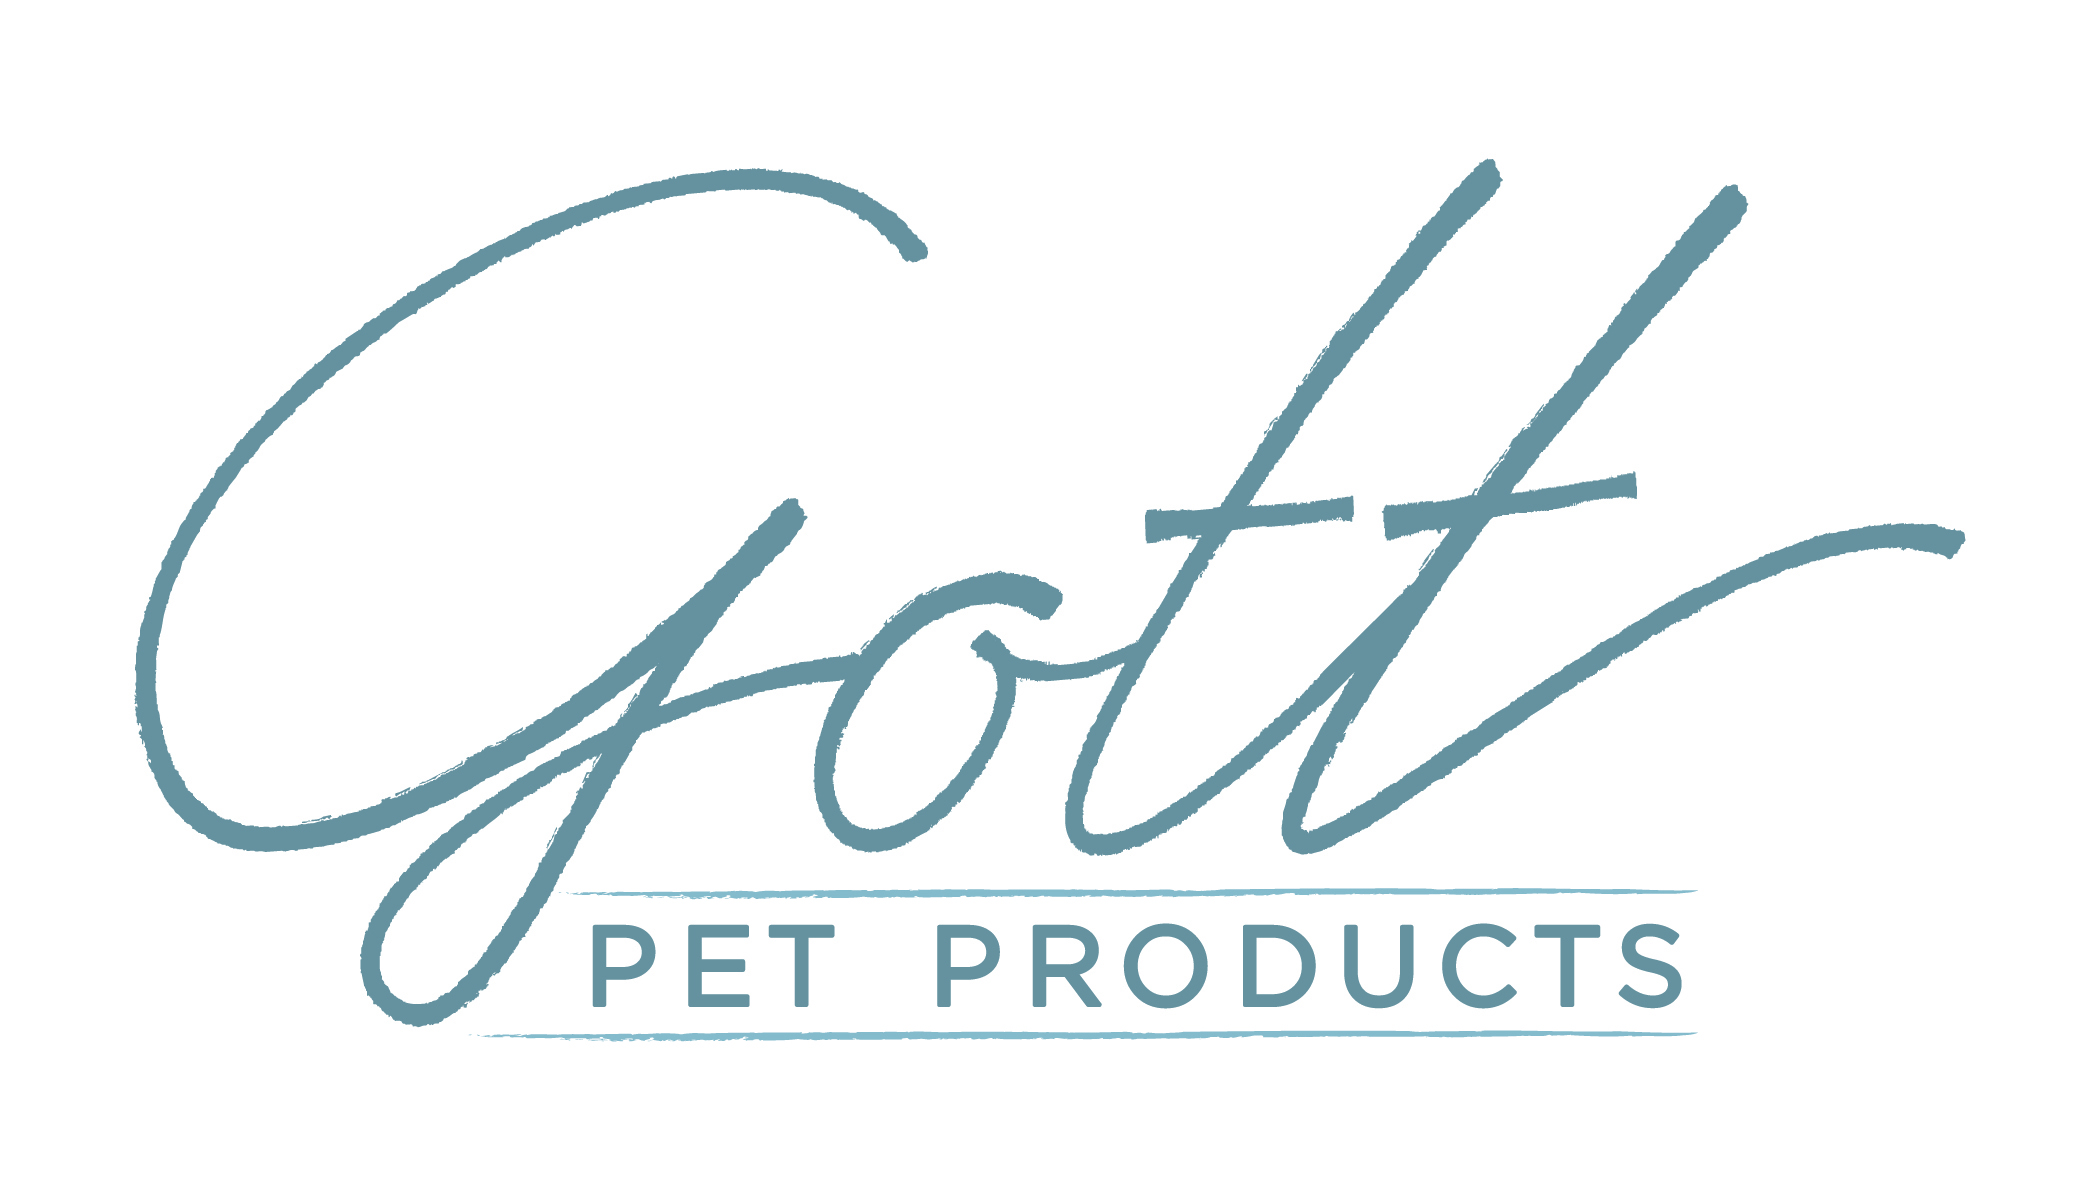 Charlee Bear Pet Products renamed to Gott Pet Products